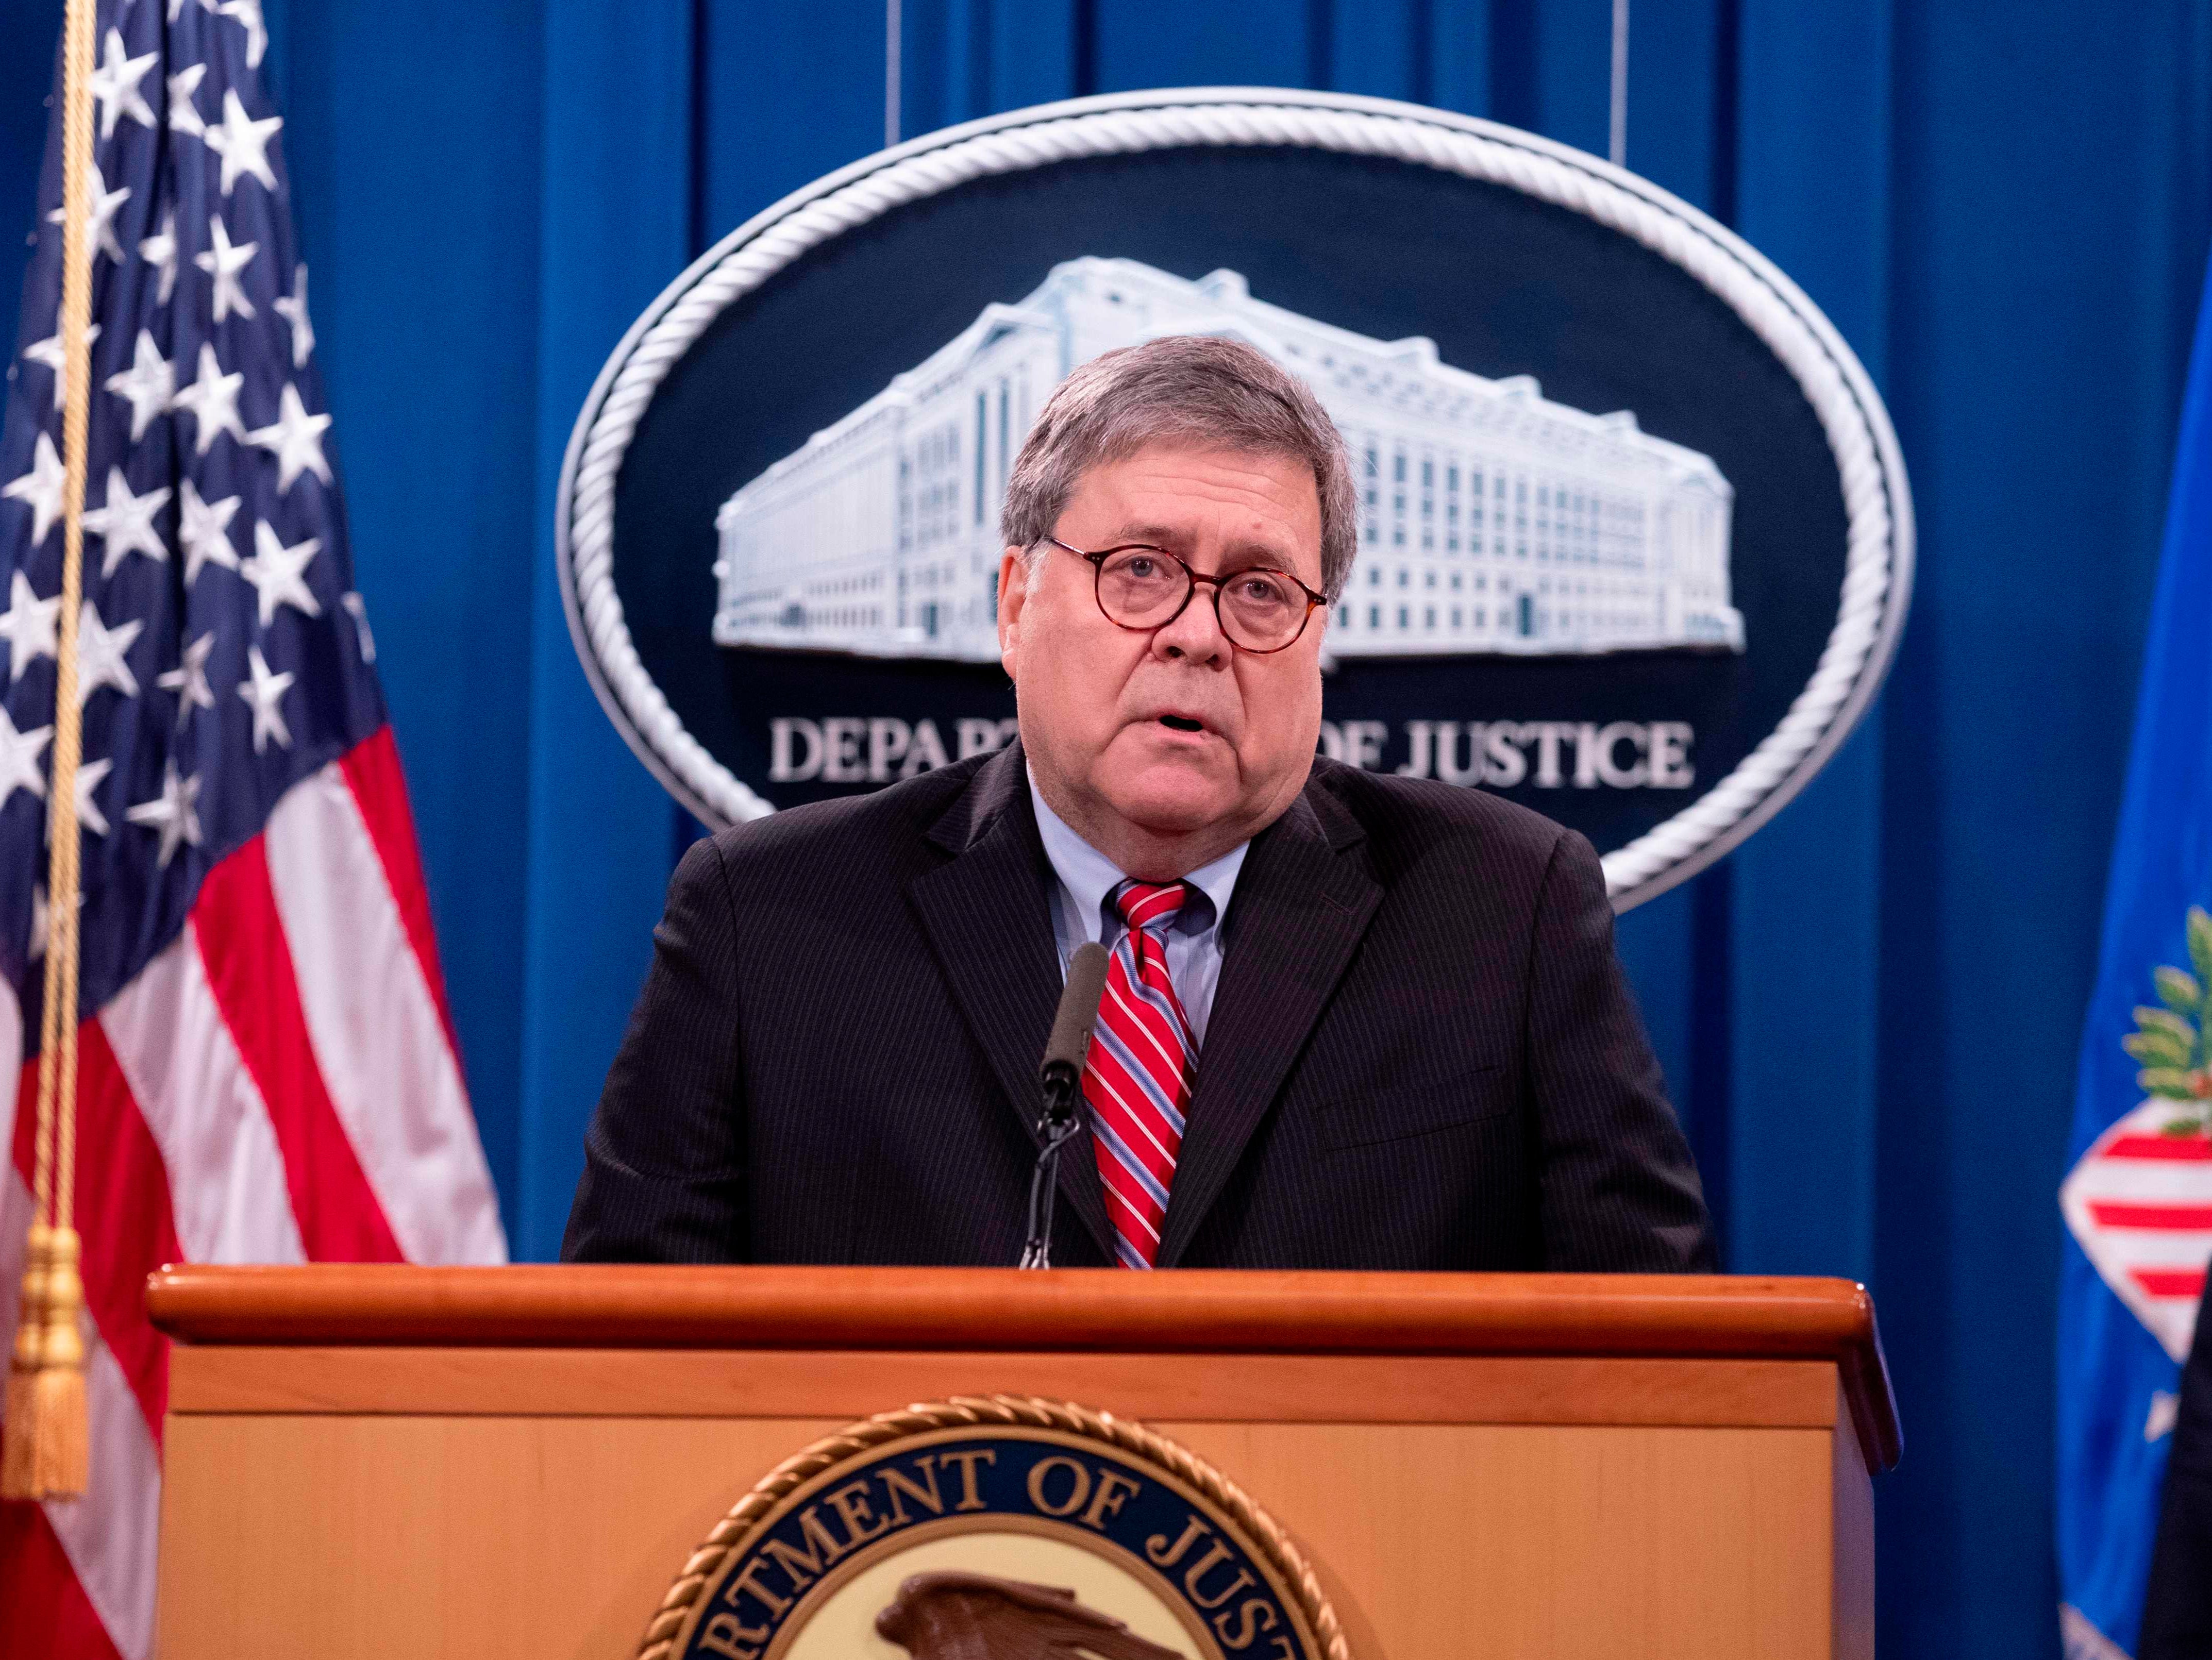 Attorney General William Barr said he sees “no reason” to seize Dominion voting machines.